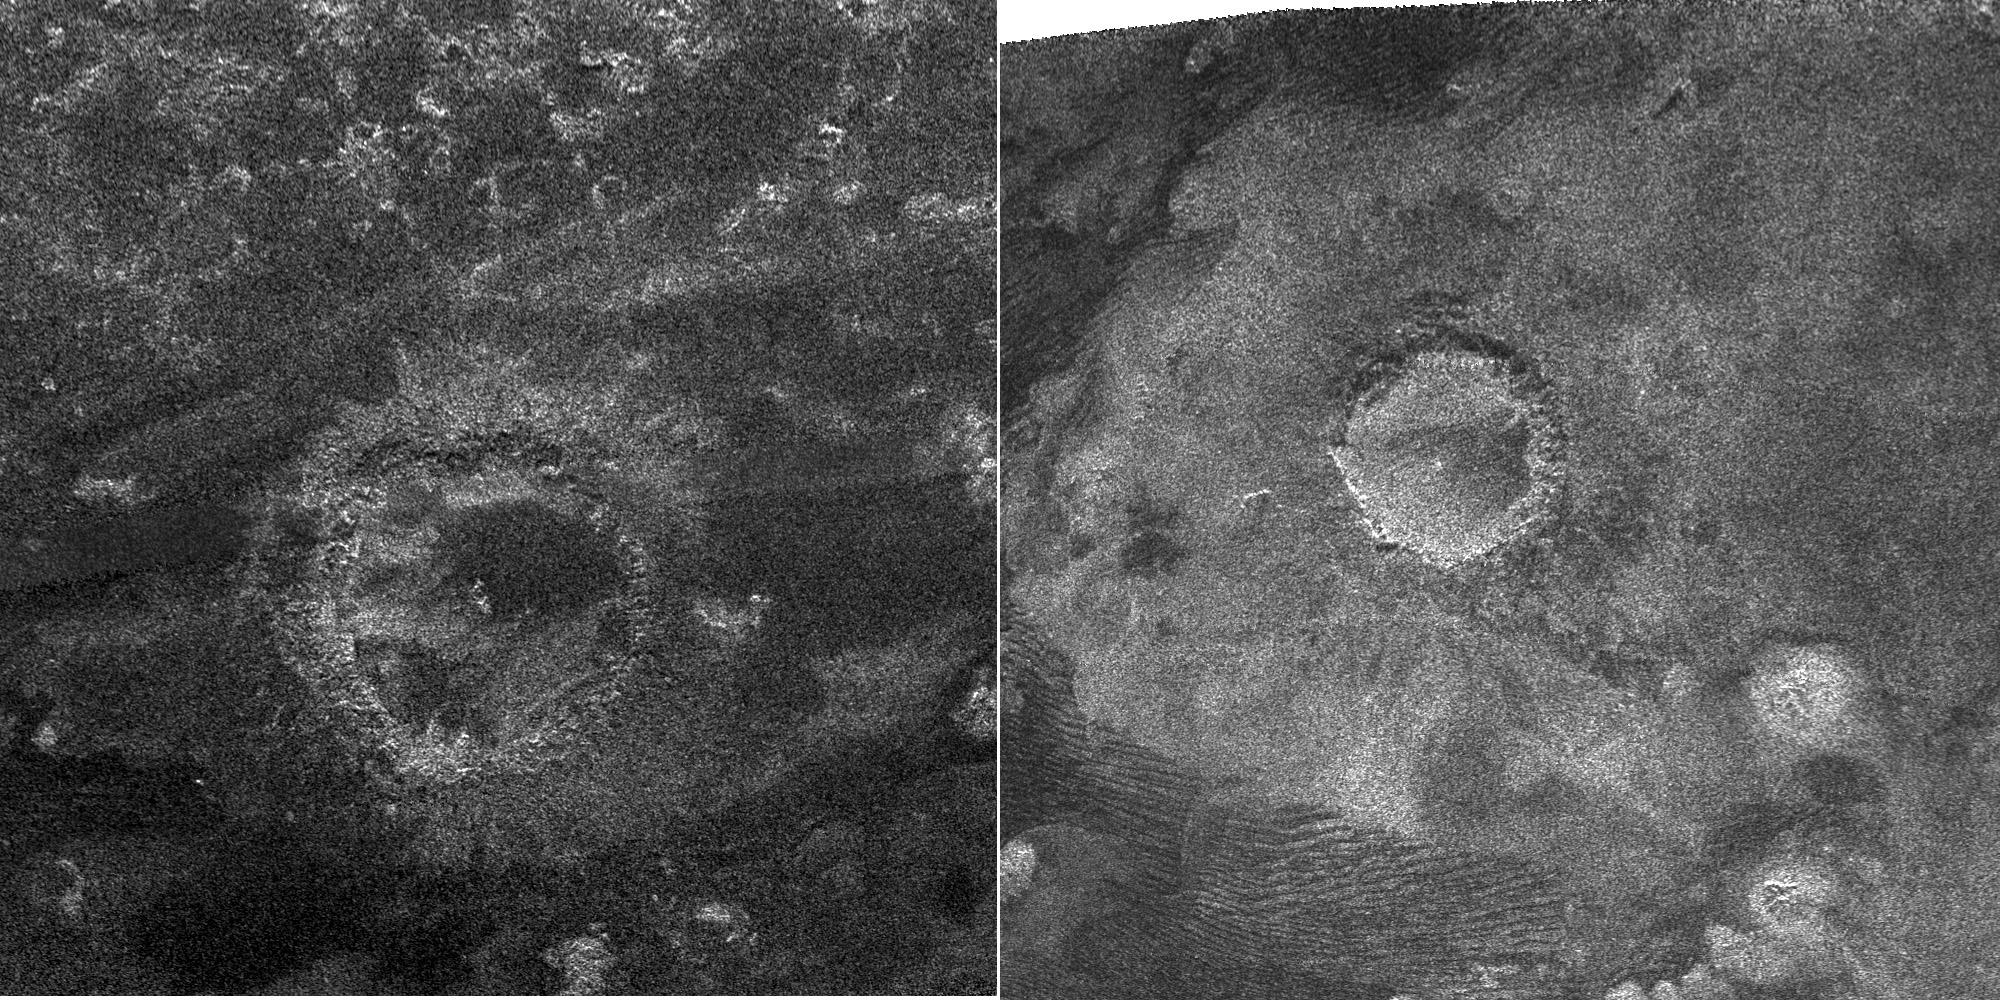 Side-by-side view of two impact craters on Titan.